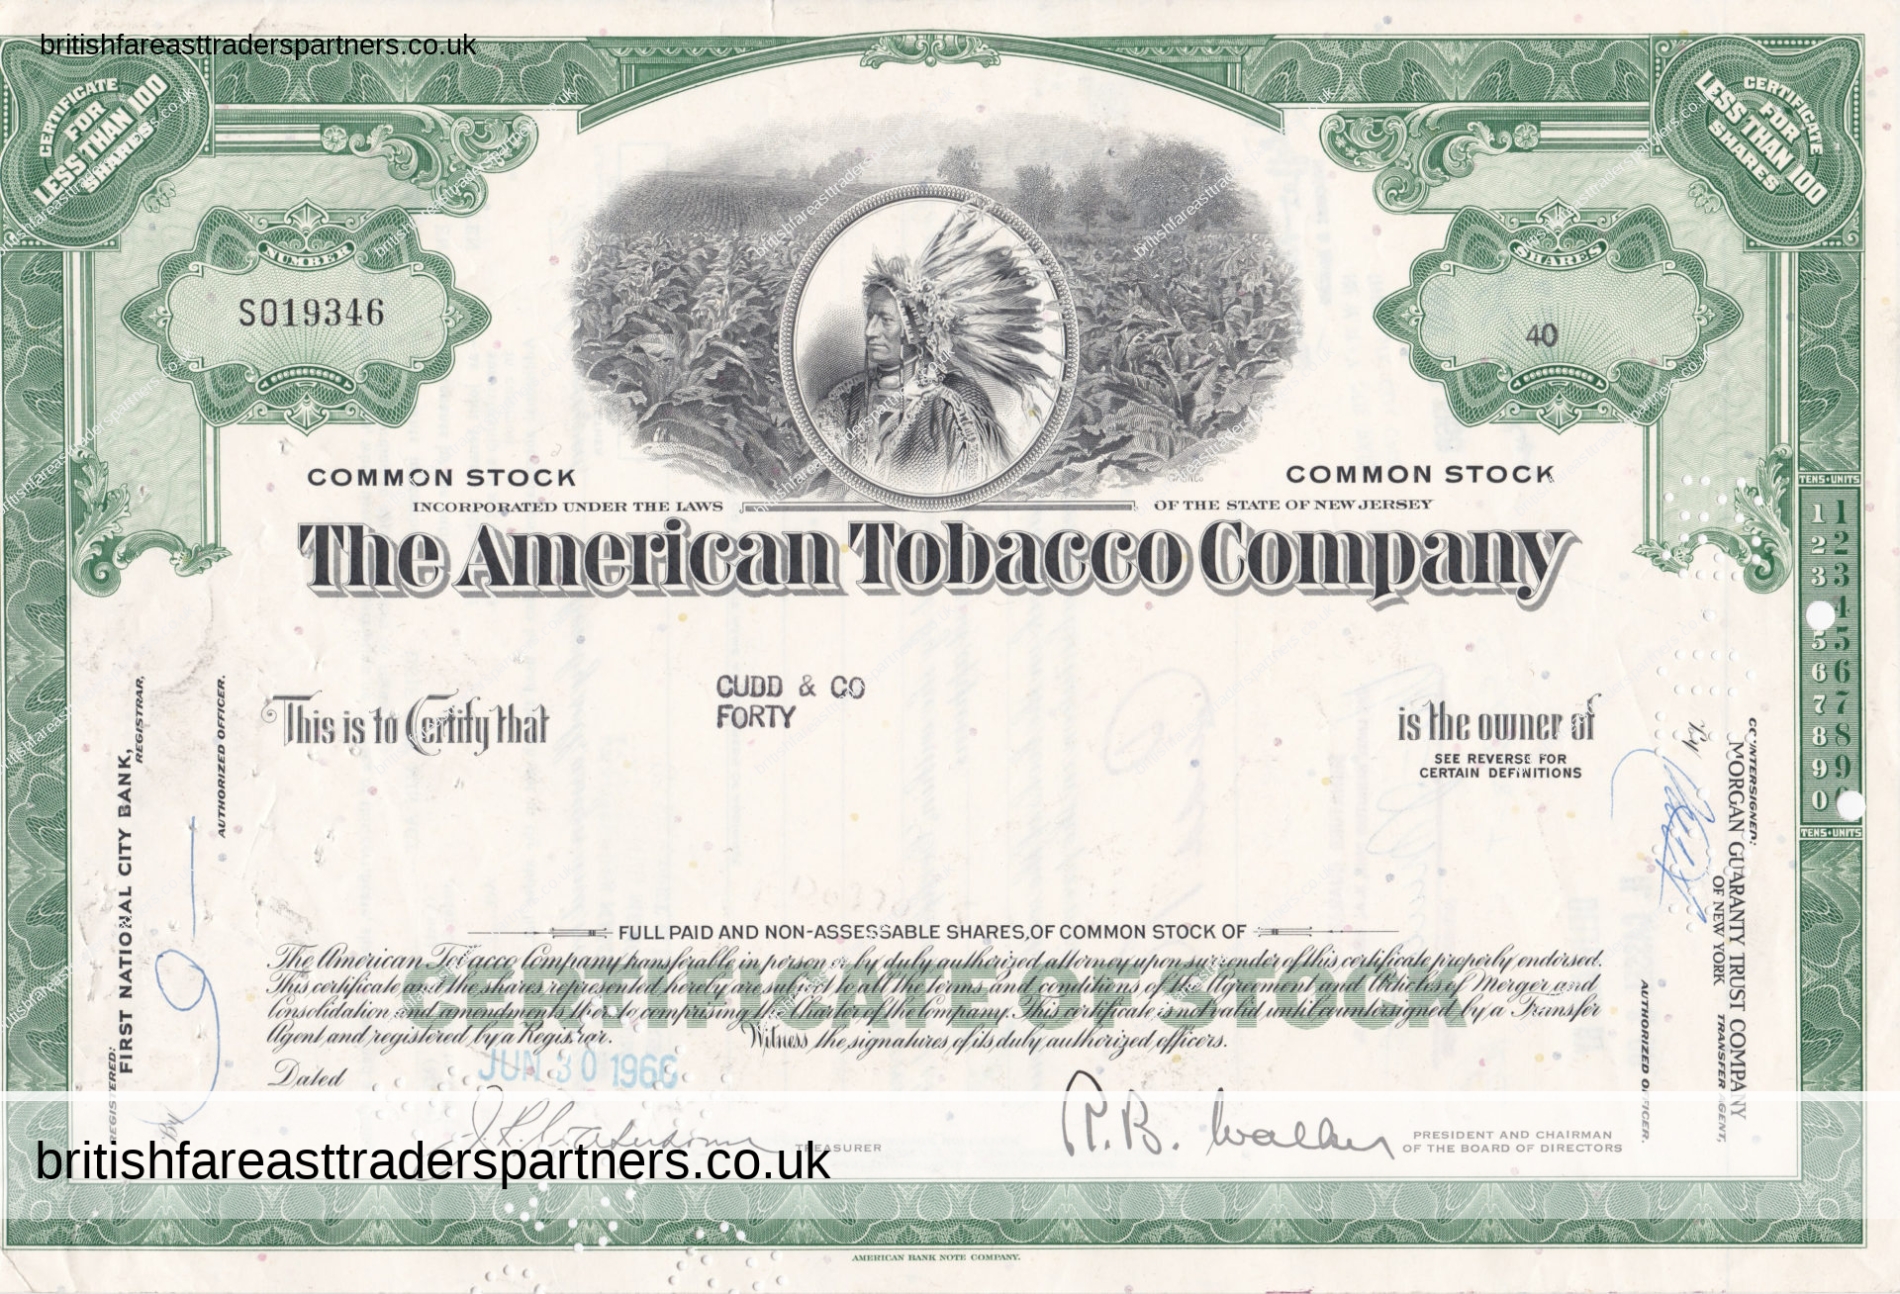 VINTAGE STOCK / SHARE CERTIFICATE 30 JUNE 1966 THE AMERICAN TOBACCO COMPANY HOLDERS: CUDD & CO. REGISTERED: FIRST NATIONAL CITY BANK COUNTERSIGNED: MORGAN GUARANTY & TRUST COMPANY NEW YORK 40 COMMON STOCK COLLECTABLE DOCUMENTS | SHARE CERTIFICATES | COMPANIES | WORLD | SCRIPOPHILY | BUSINESS | INVESTMENTS